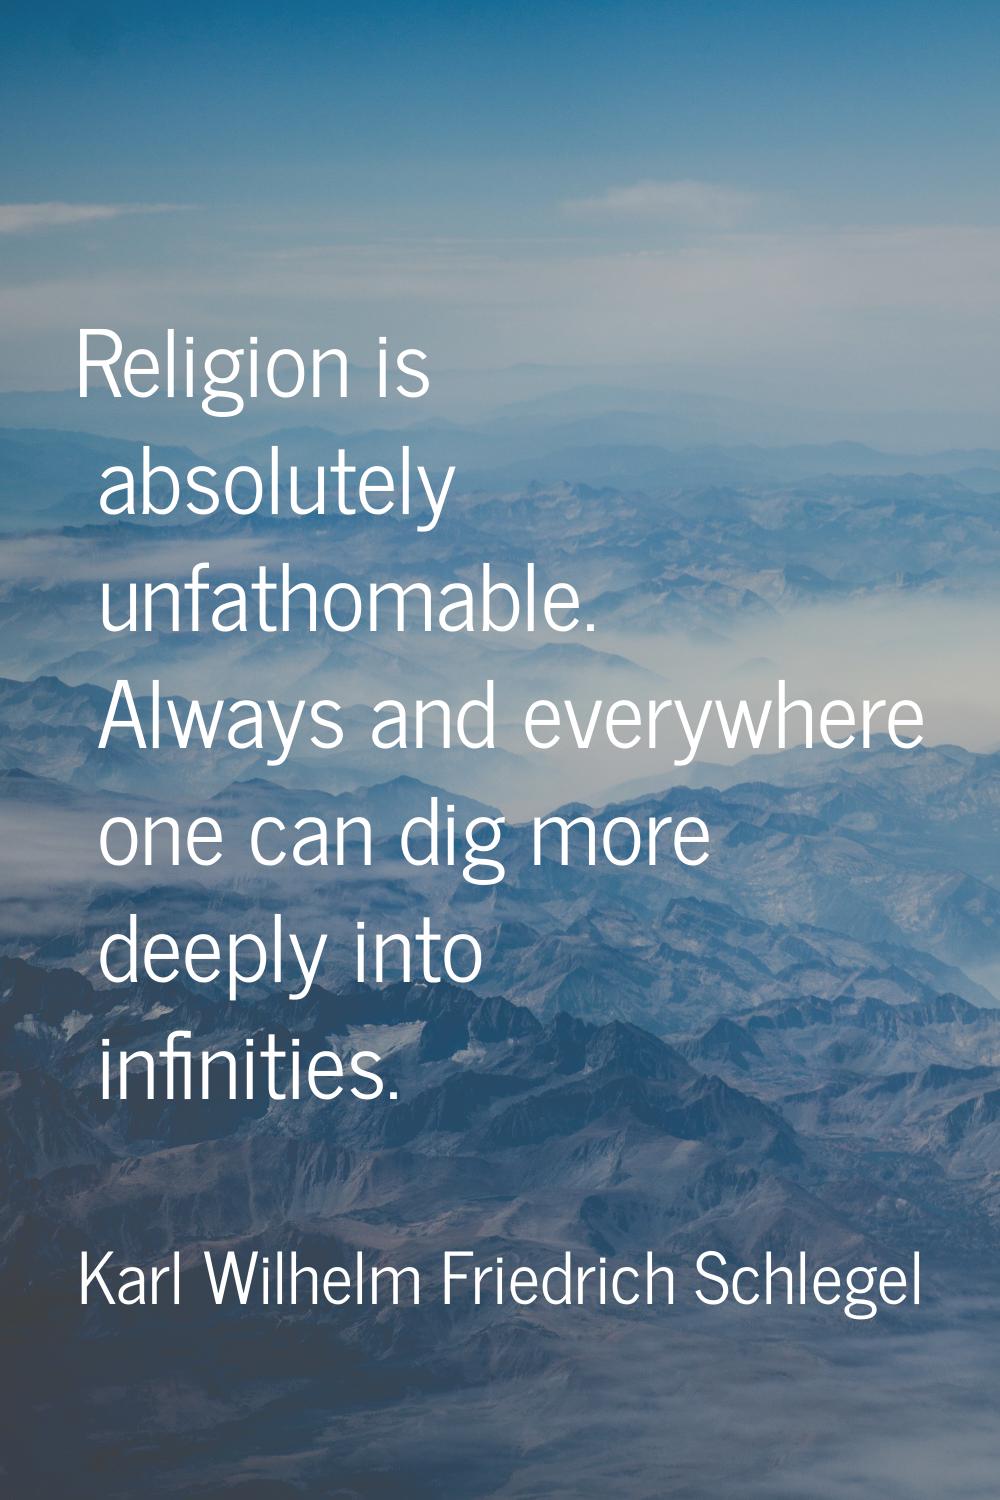 Religion is absolutely unfathomable. Always and everywhere one can dig more deeply into infinities.